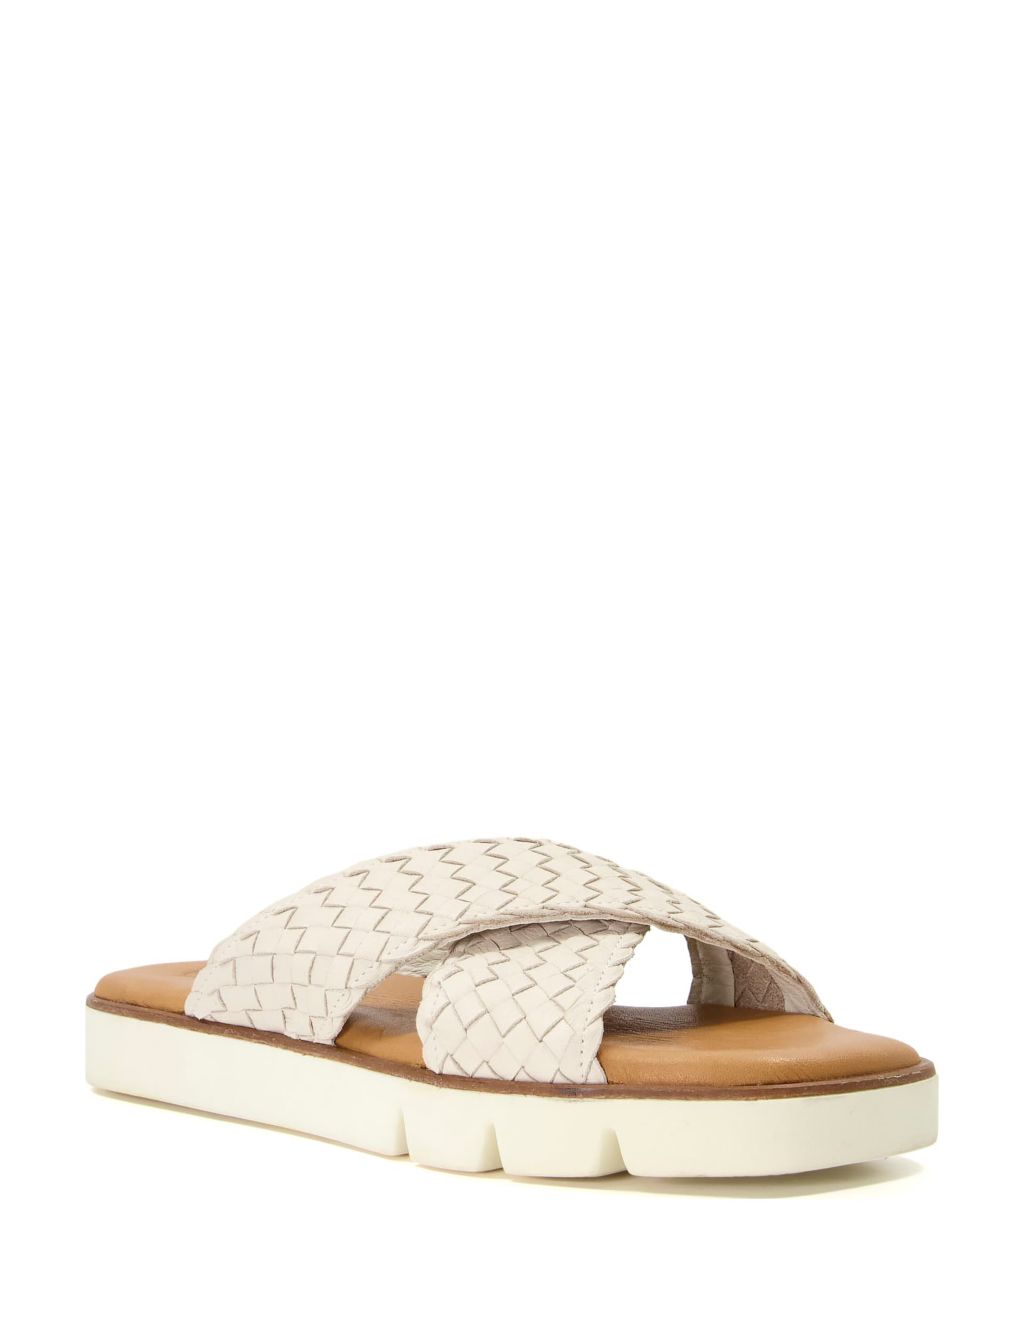 Leather Woven Crossover Flat Sliders image 2